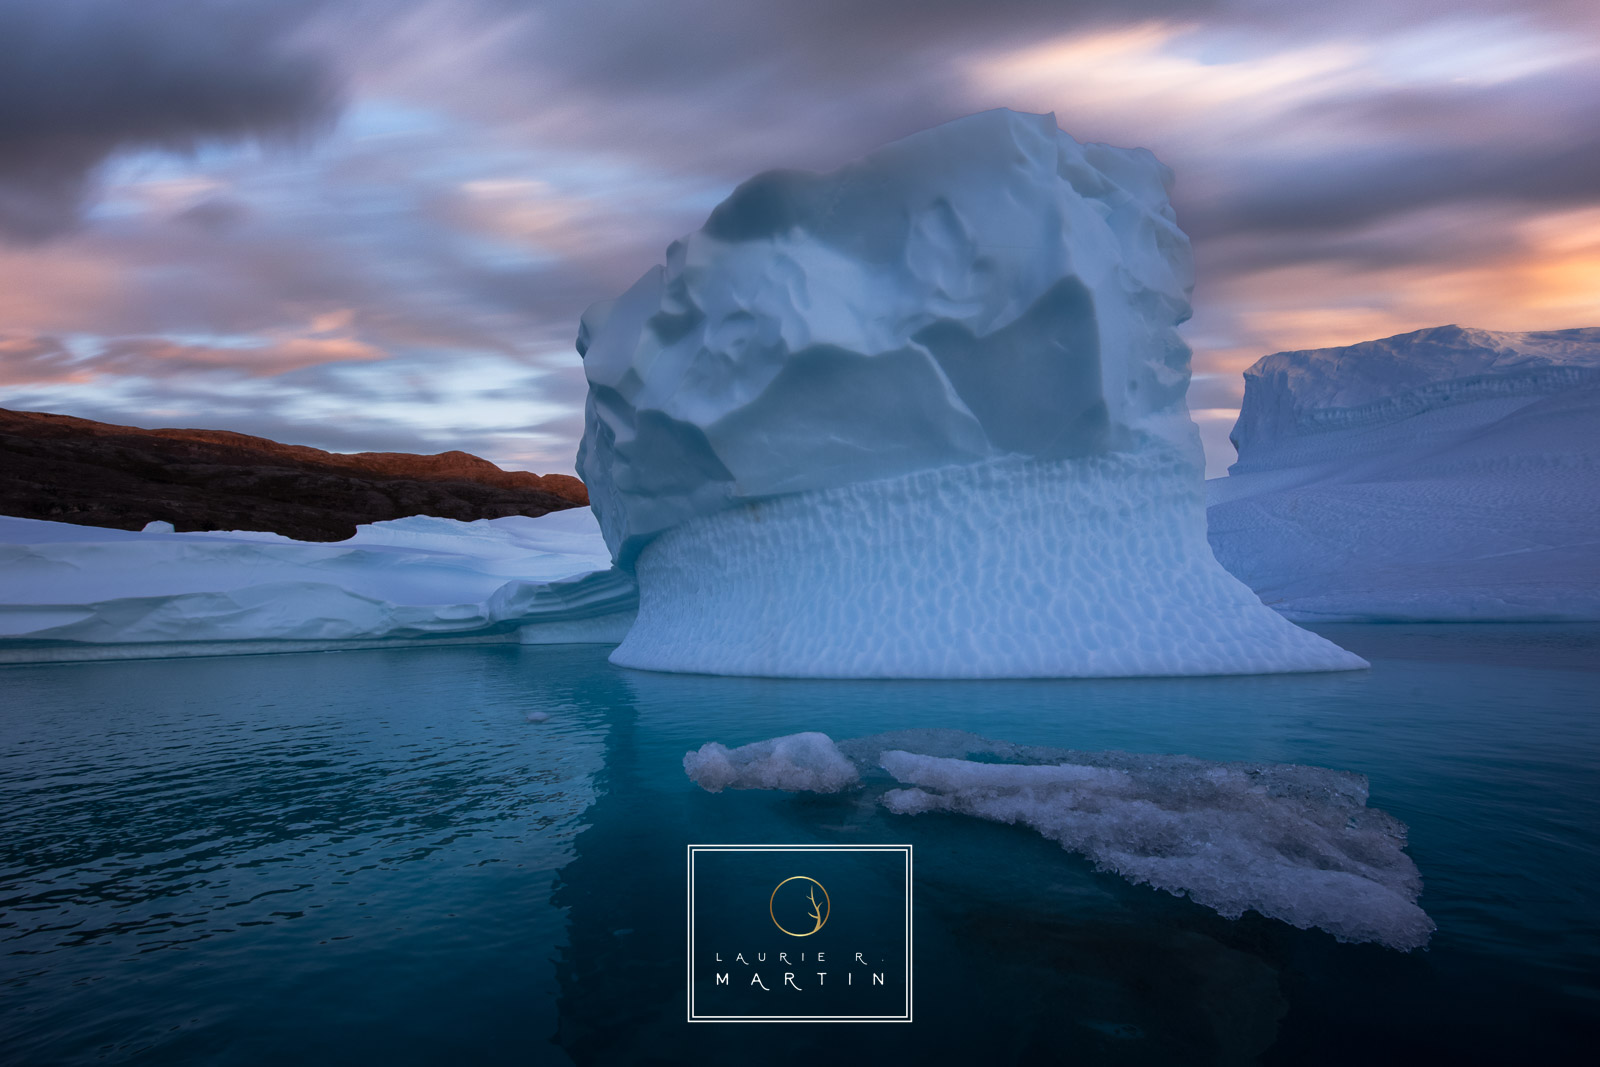 I love to study the shape and cuts in Icebergs. As a landscape photographer you are constantly looking at your subject thinking...